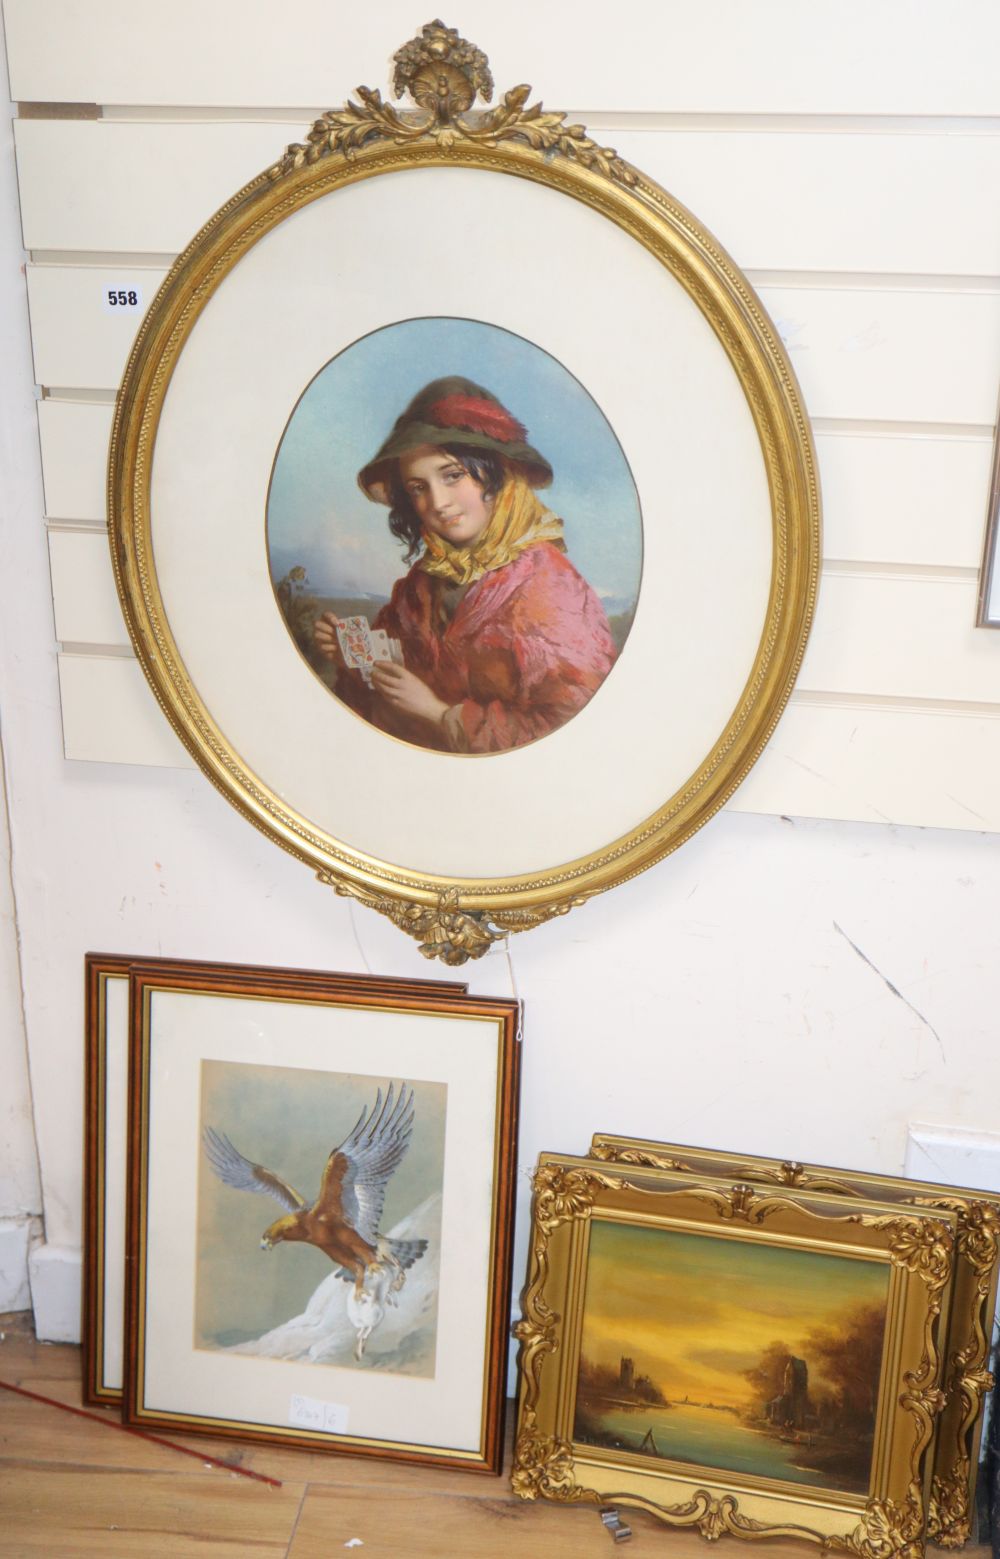 G.J.C. Kirby, two bird studies, a pair of modern oil on board landscapes and a chromolithograph portrait in gilt oval frame, 33 x 28cm